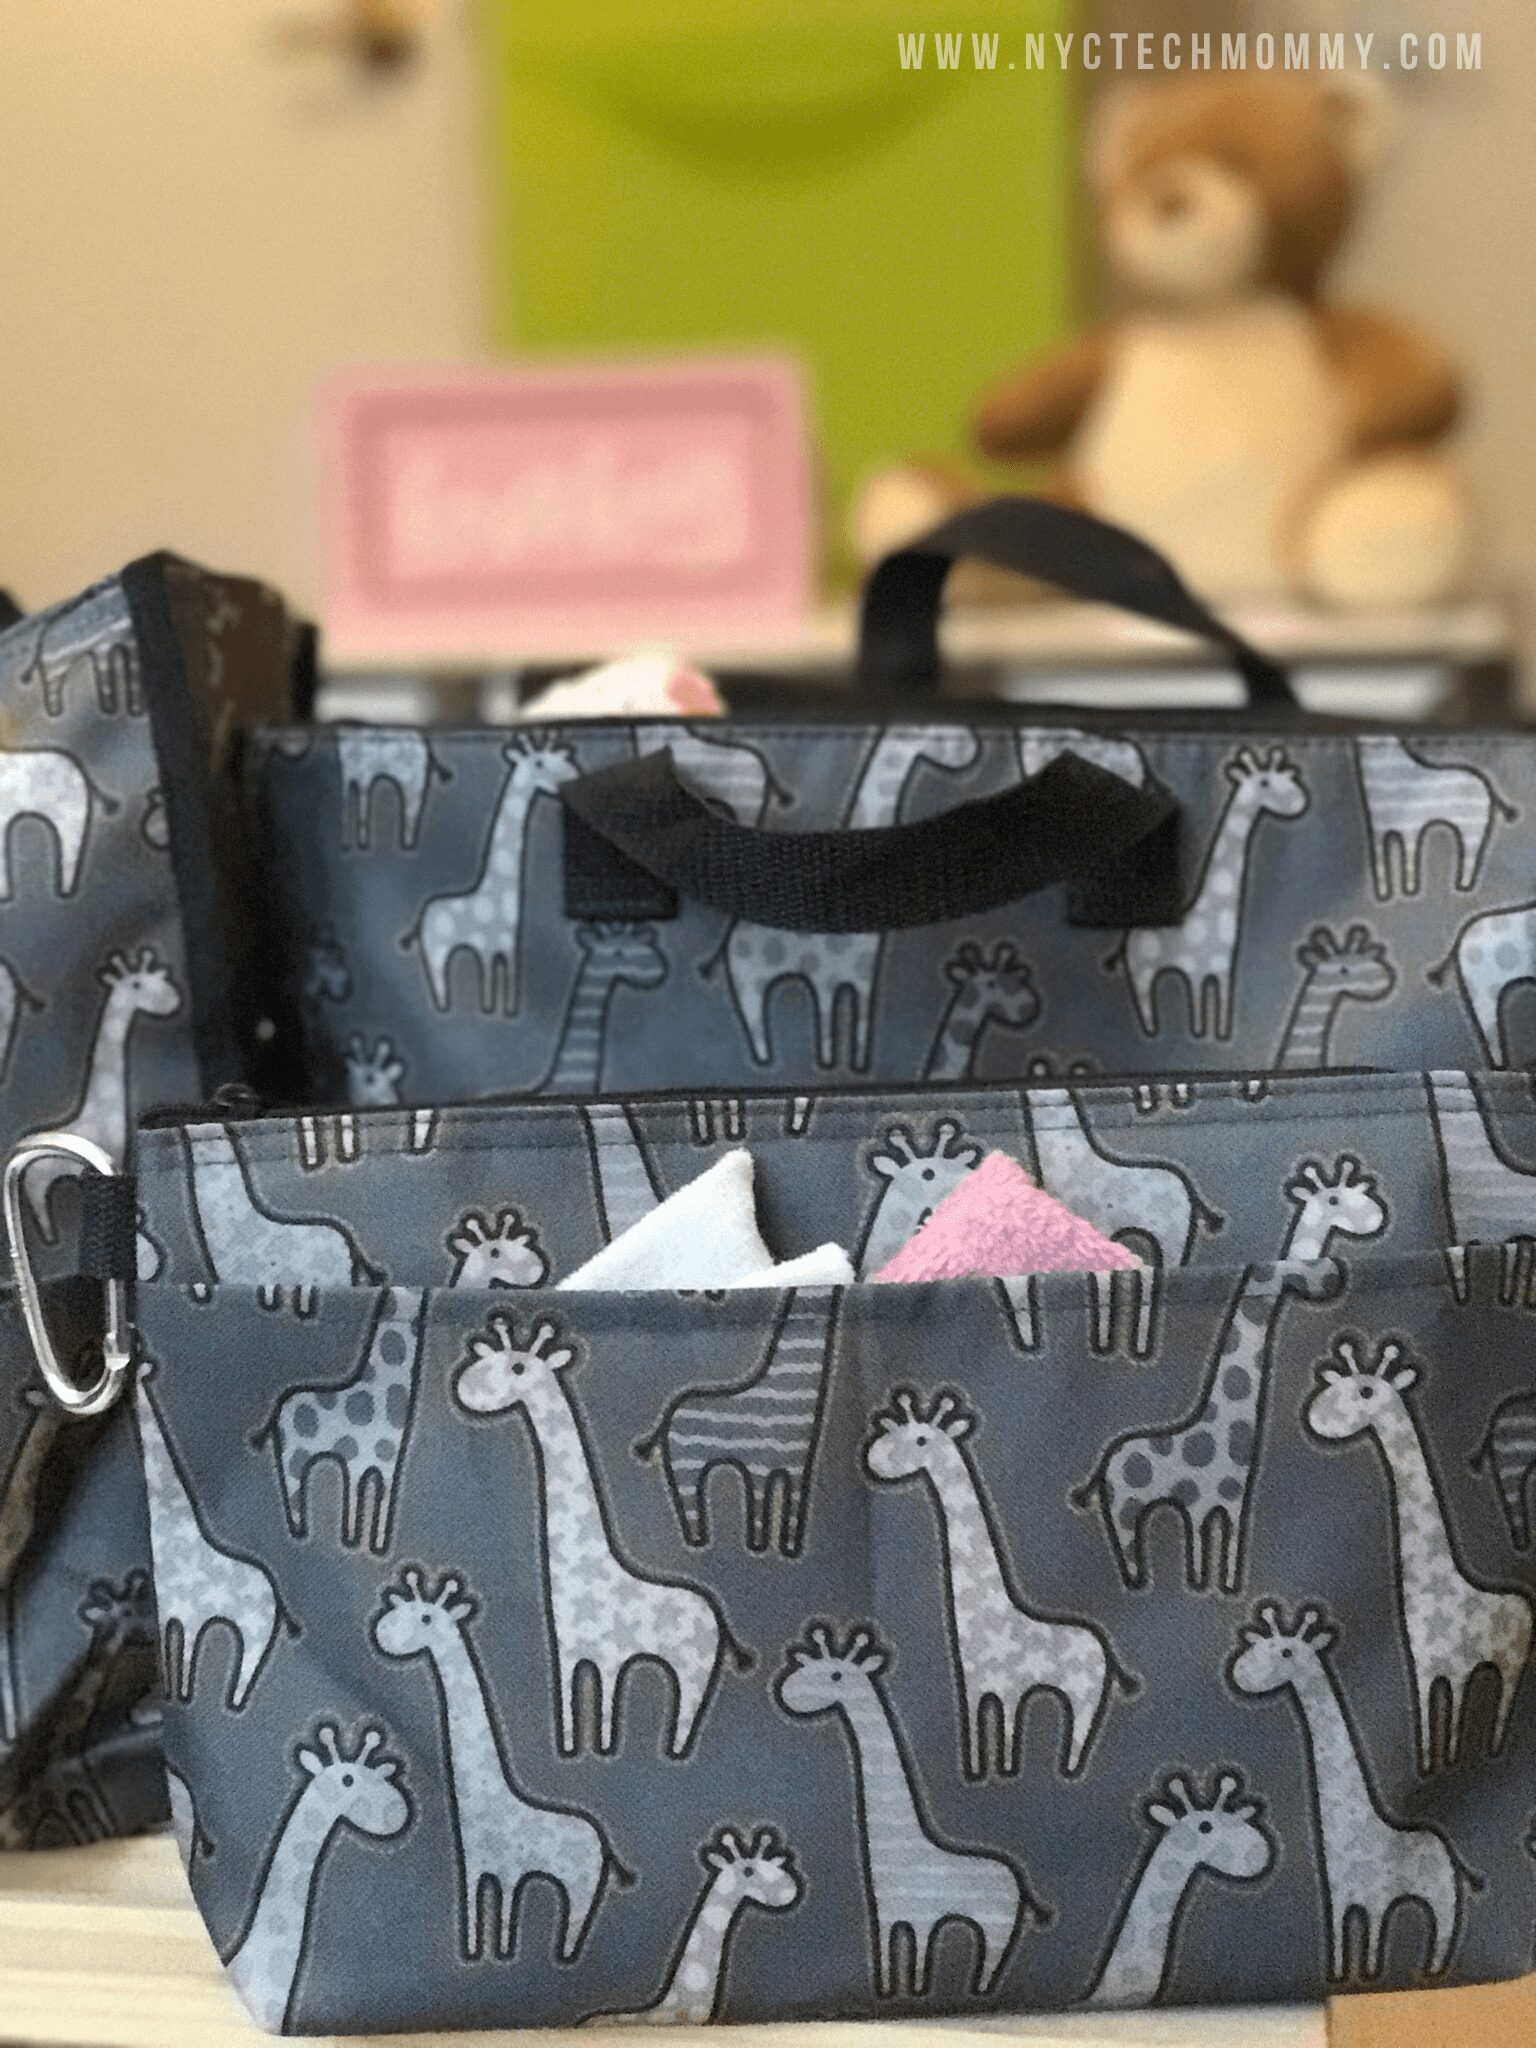 Thirty-One Gifts - The Zip-Top Organizing Utility Tote is the same as our  Organizing Utility Tote with an added zipper! Get the Zip-Top Utility Tote  this month for just $10 when you